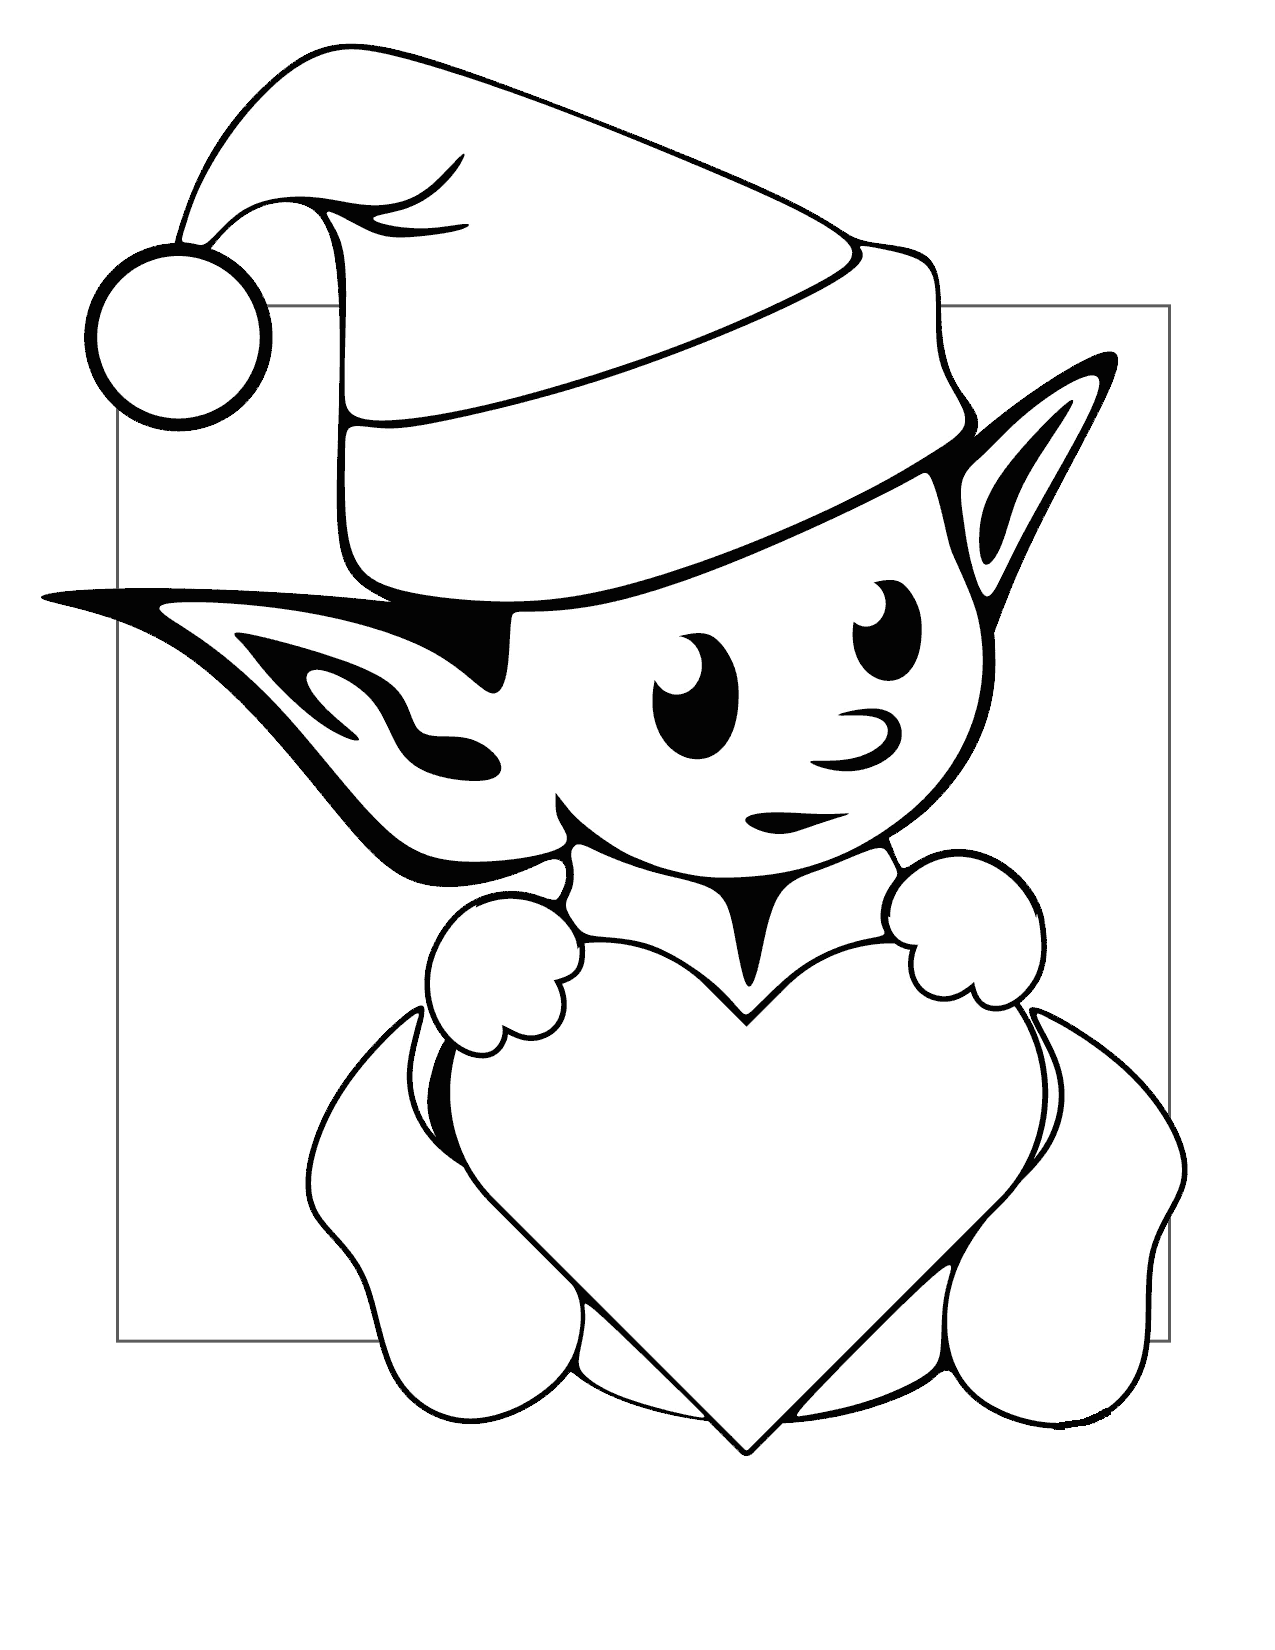 Cute Christmas Elf Coloring Page